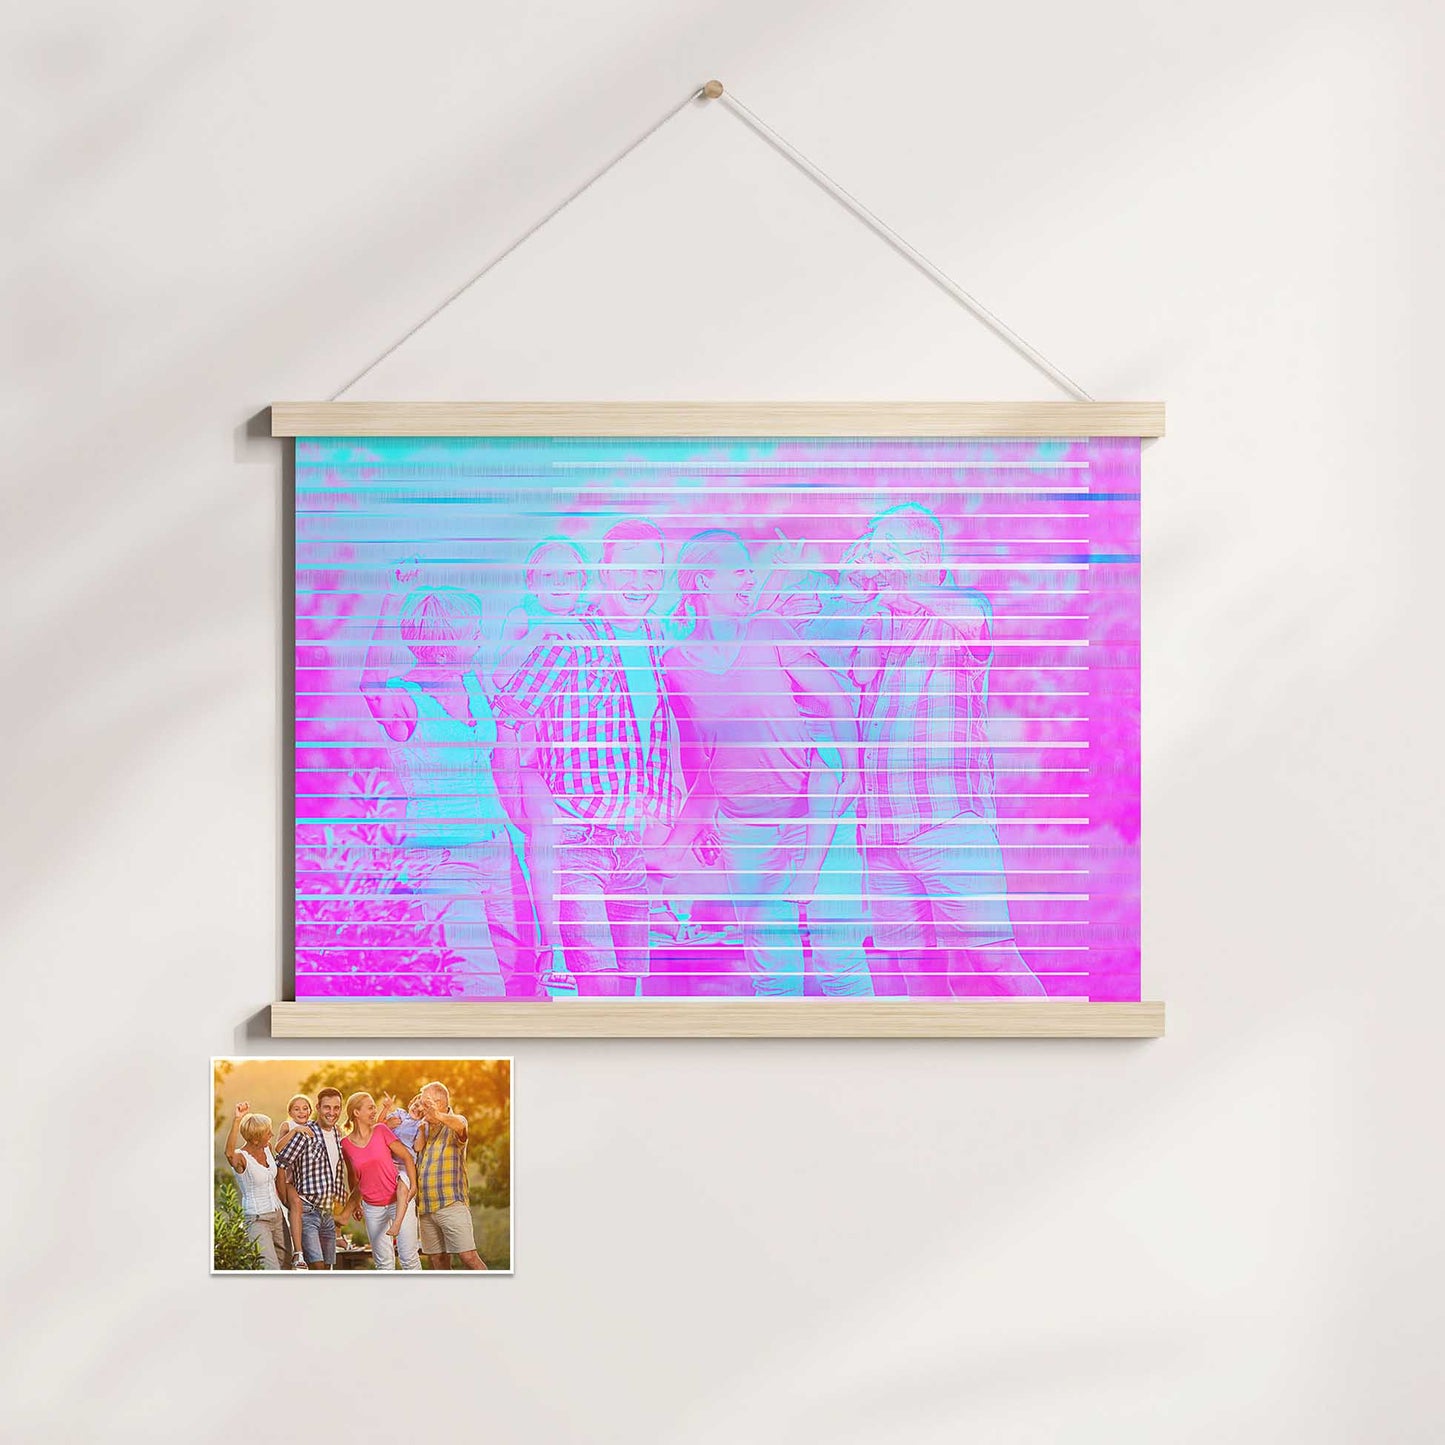 Make a statement with our Personalised Purple & Blue Poster Hanger. Printed from your photo, it showcases vivid purple and blue hues that capture attention. The modern filter effect adds a sharp and colorful touch, making it a standout print